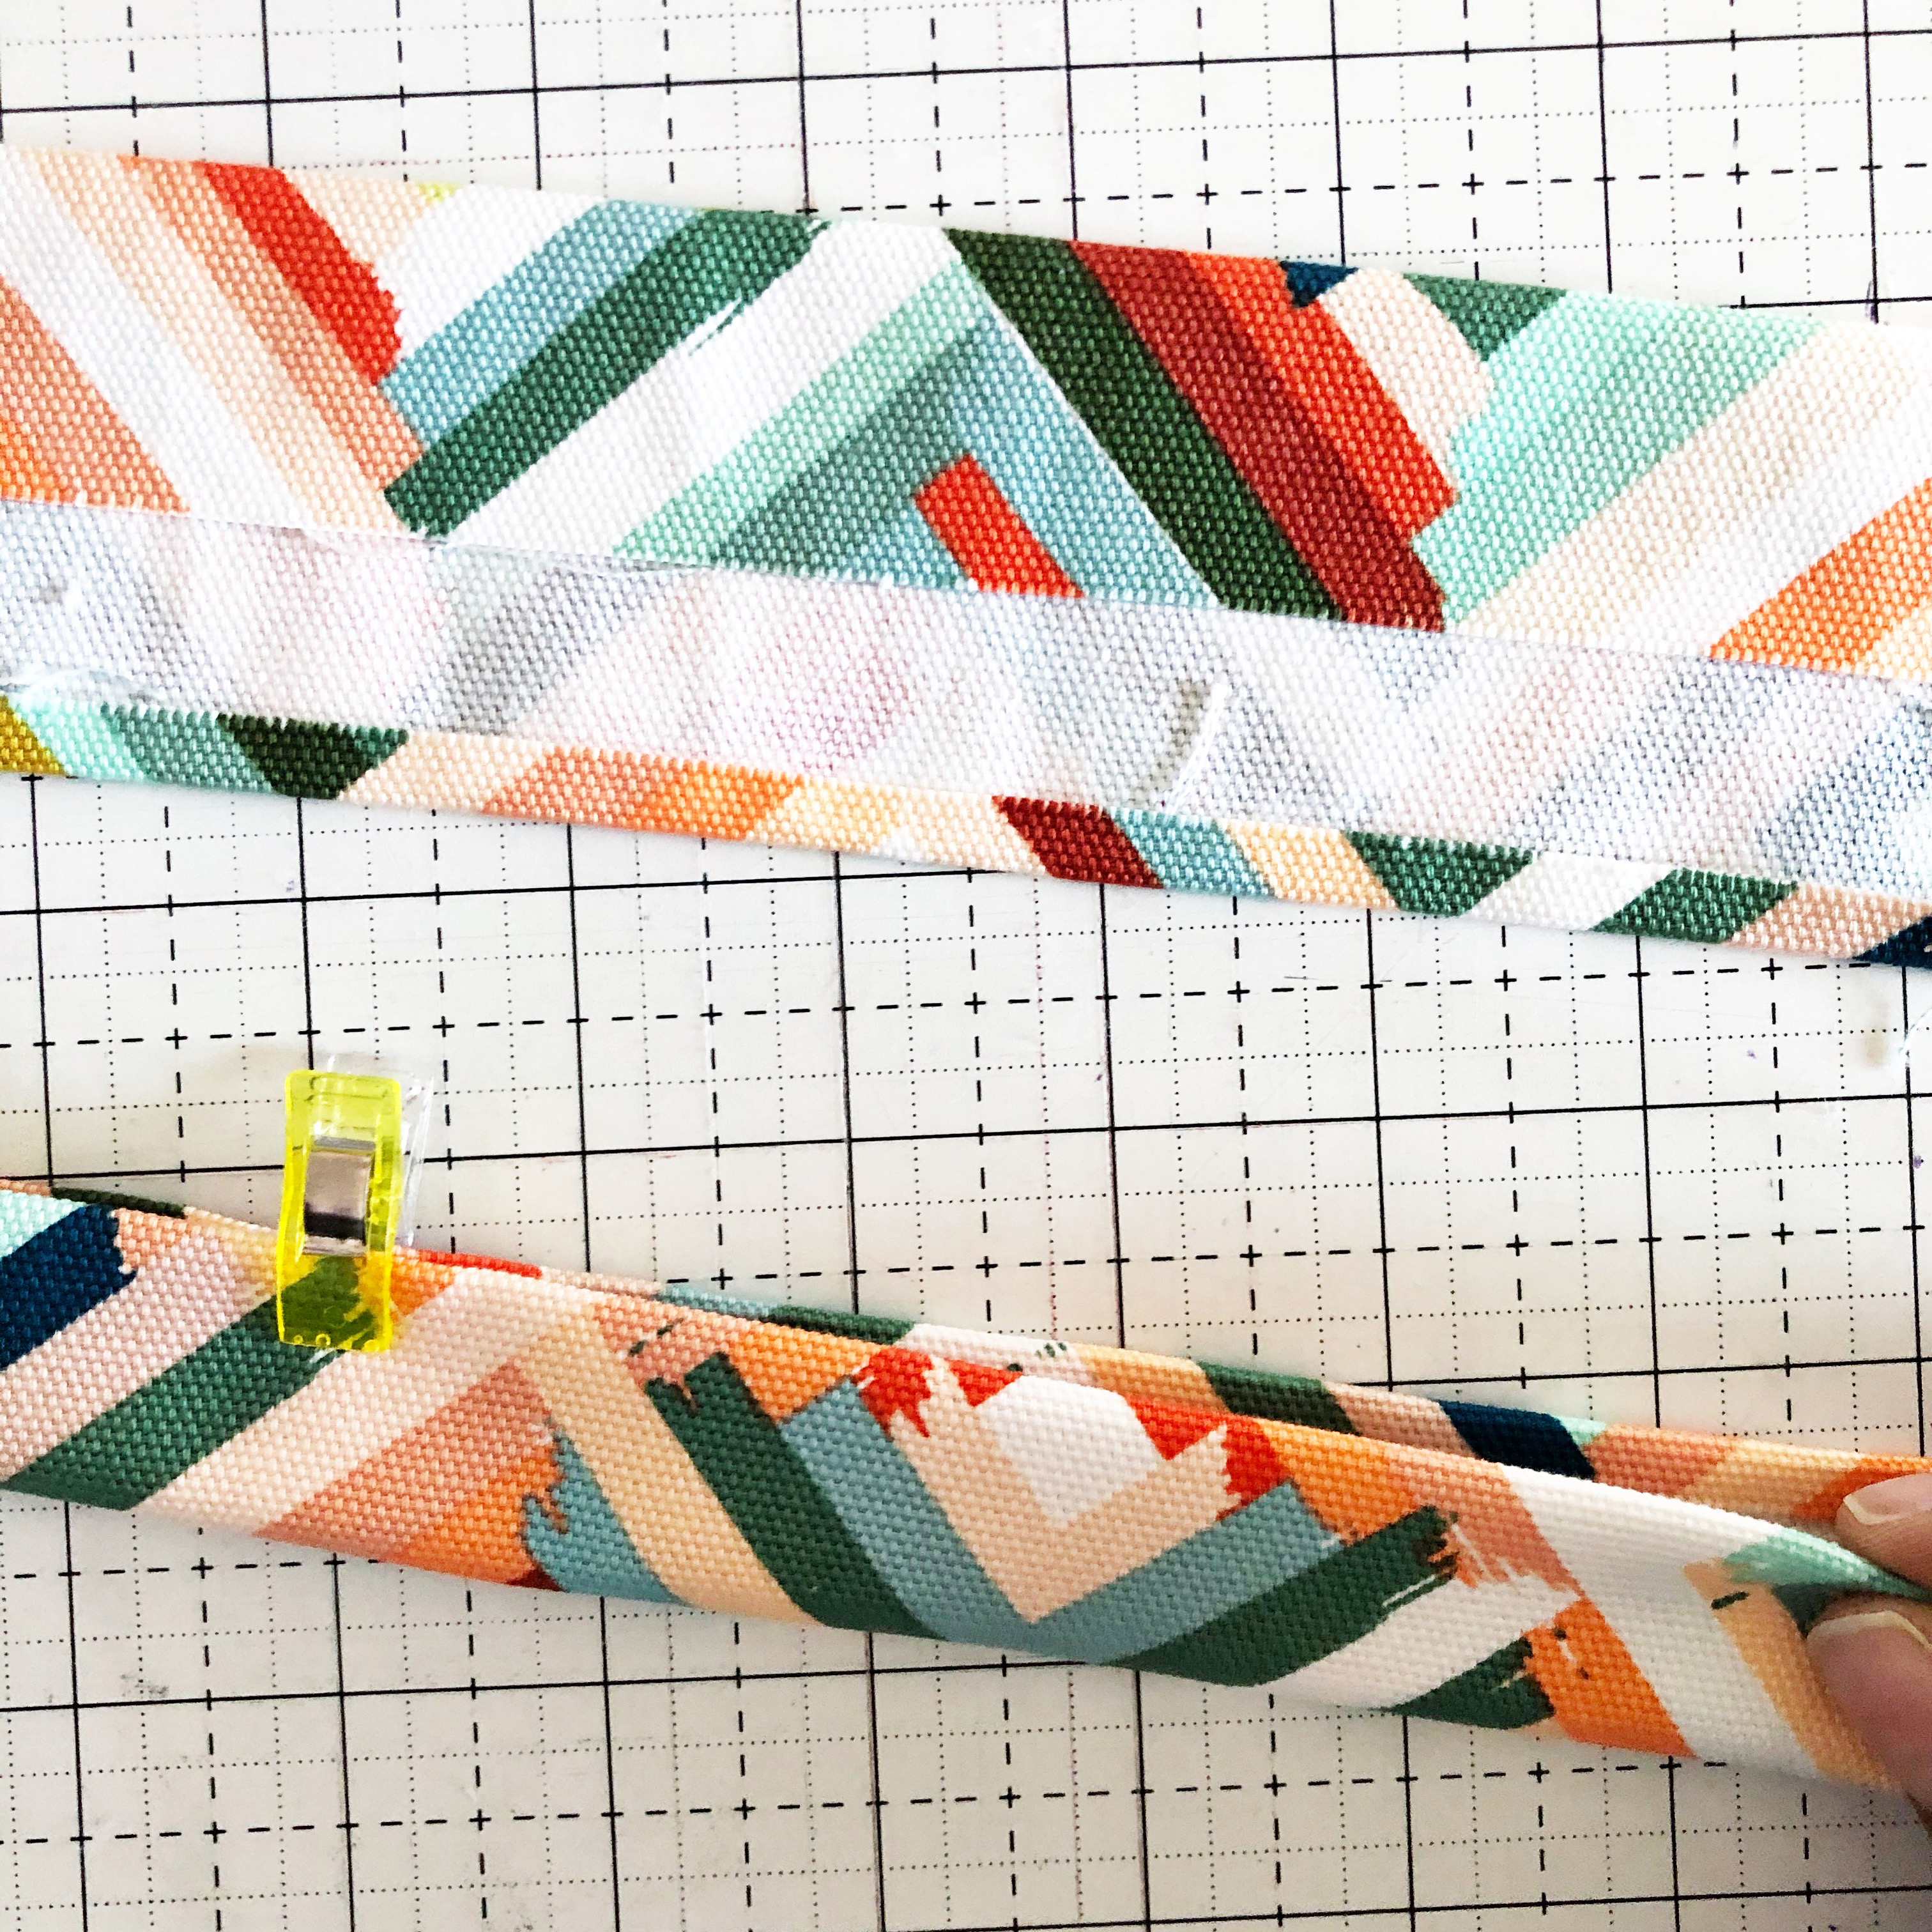 Canvas Market Bag Tutorial: Preparing the fabric for sewing